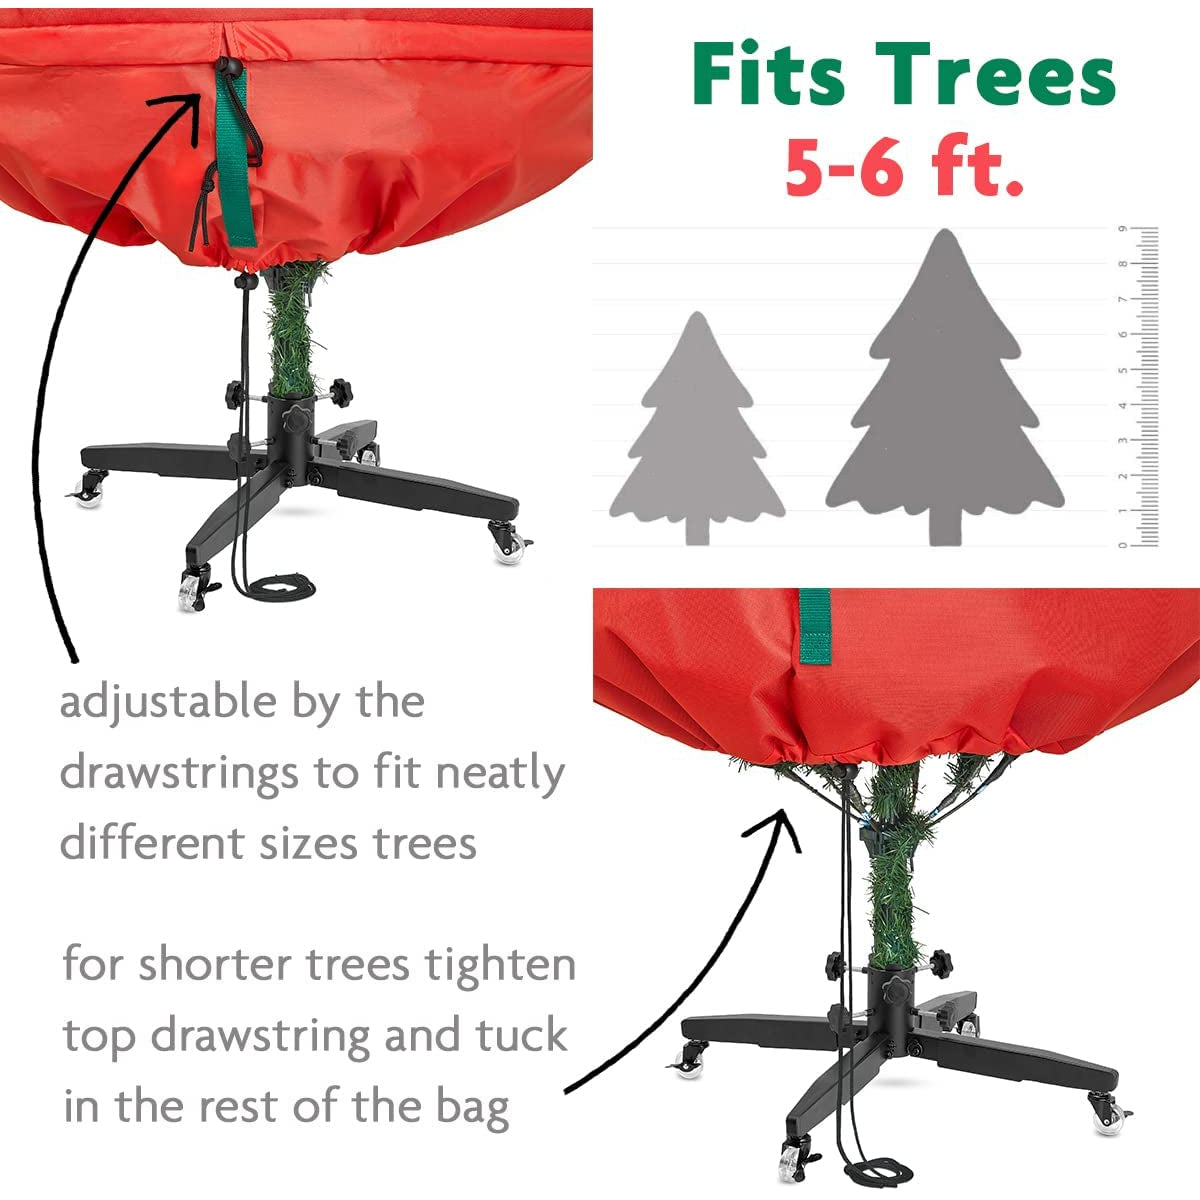 Christmas Tree Storage Bag – Premium Christmas Tree Cover Upright –  Tear Resistant 600D Material -Artificial Assembled topiary and Regular Trees, No Need to Remove all Decorations - Drawstring Hem